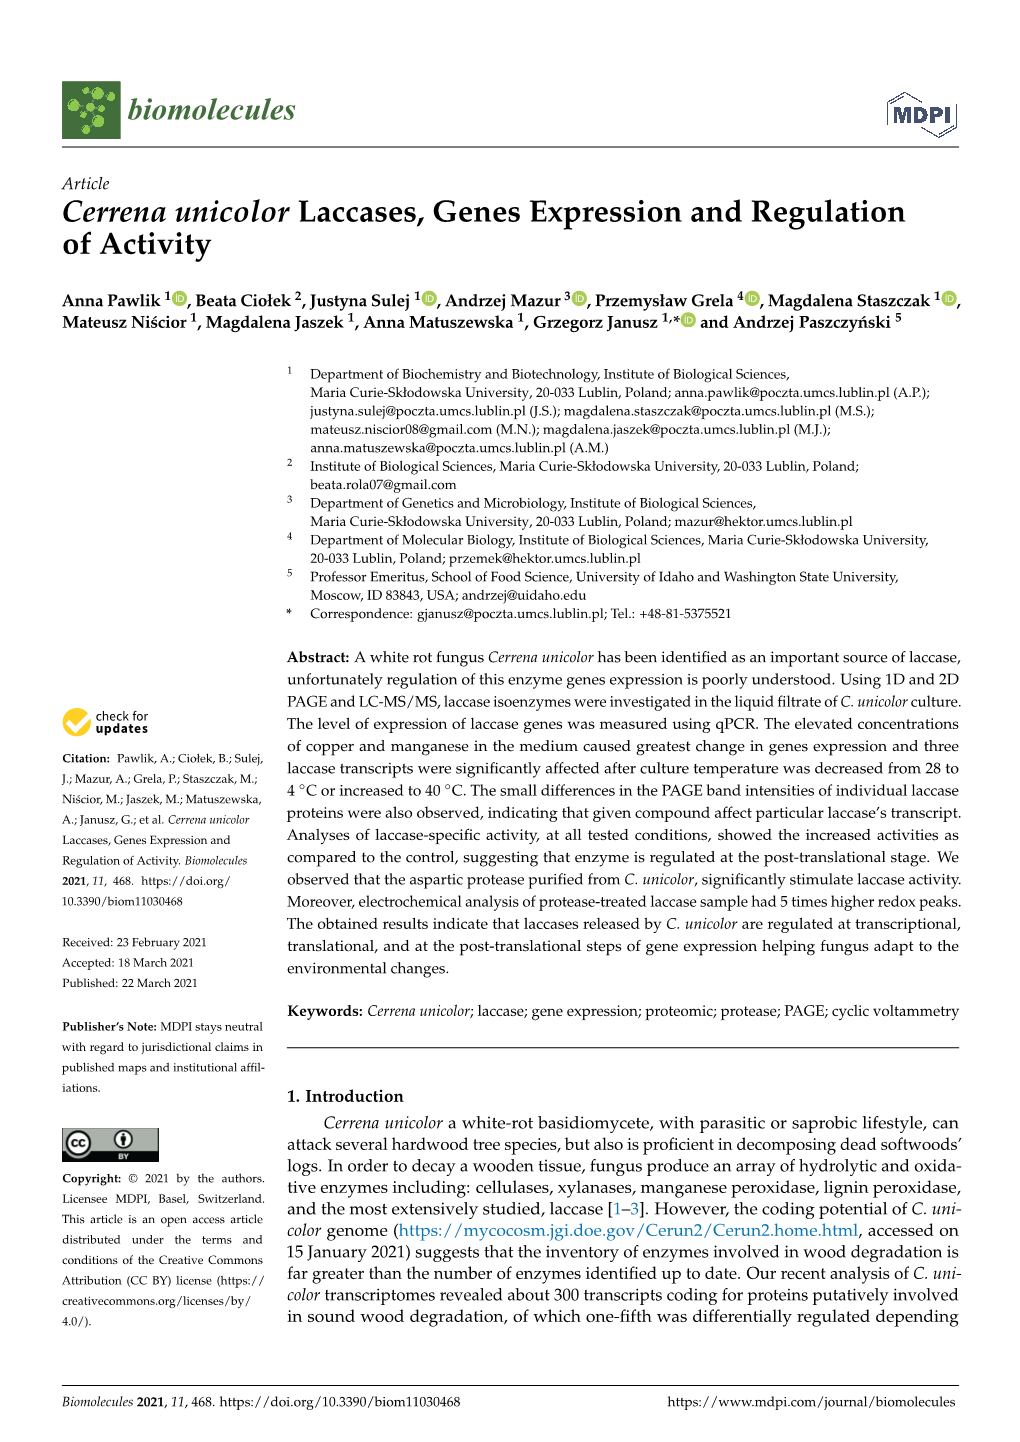 Cerrena Unicolor Laccases, Genes Expression and Regulation of Activity